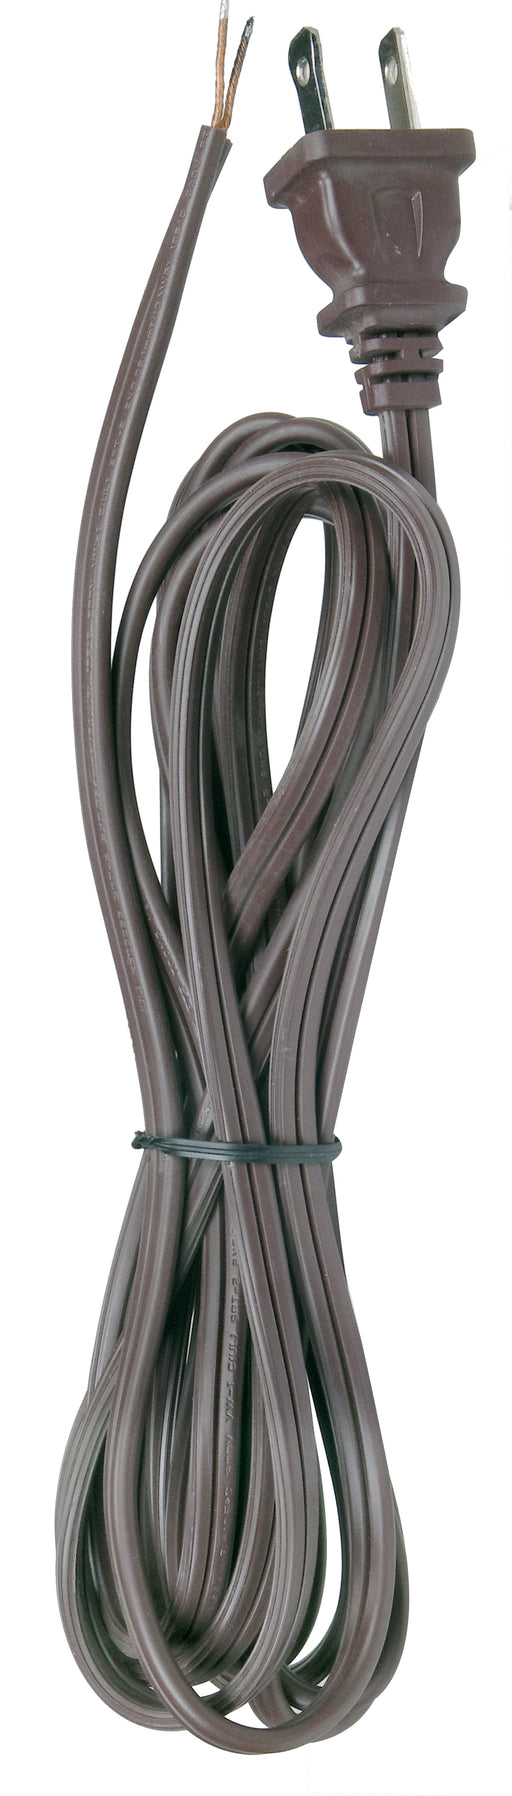 SATCO/NUVO 12 Foot 18/2 SPT-2 105C Cord Set Brown Finish 72 Inch Hank 150 Carton Molded Polarized Plug Tinned Tips 3/4 Inch Strip With 2 Inch Slit (90-1414)